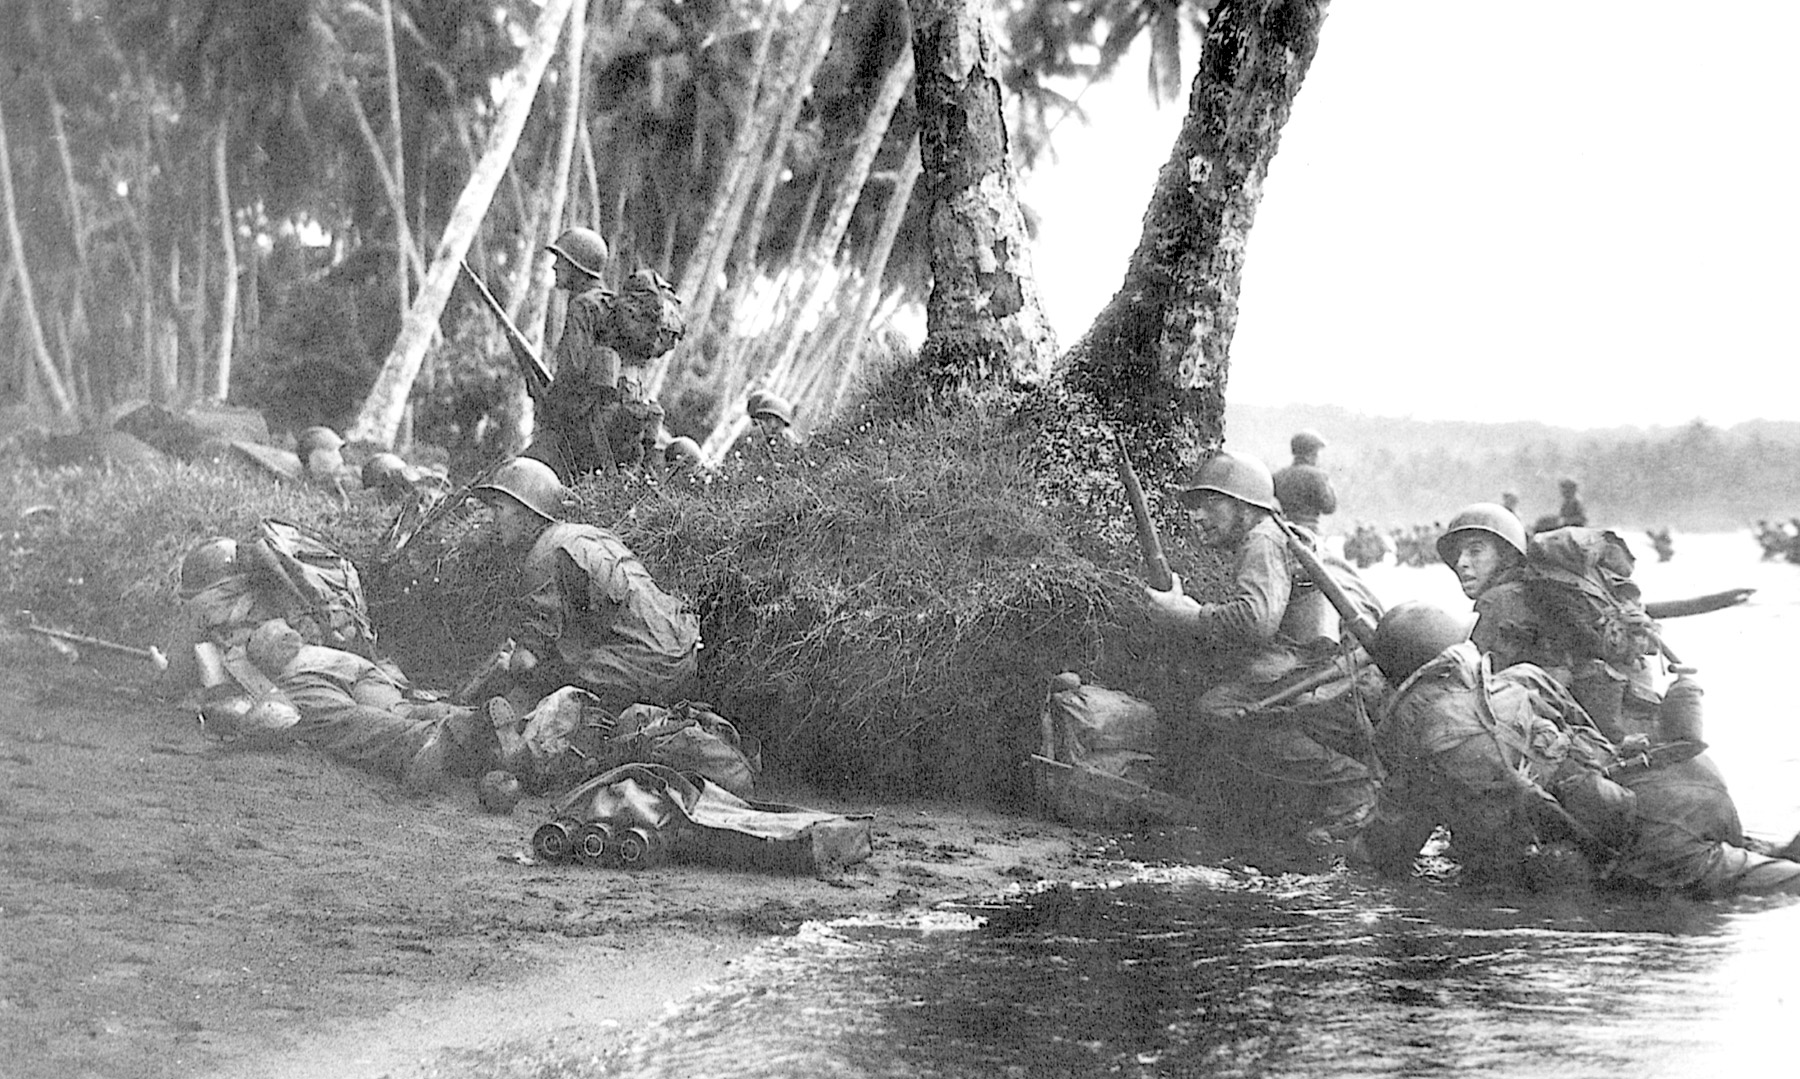 Attacking at the break of day in a heavy rainstorm, the first Marines ashore take cover behind tree trunks and anything else they can find.